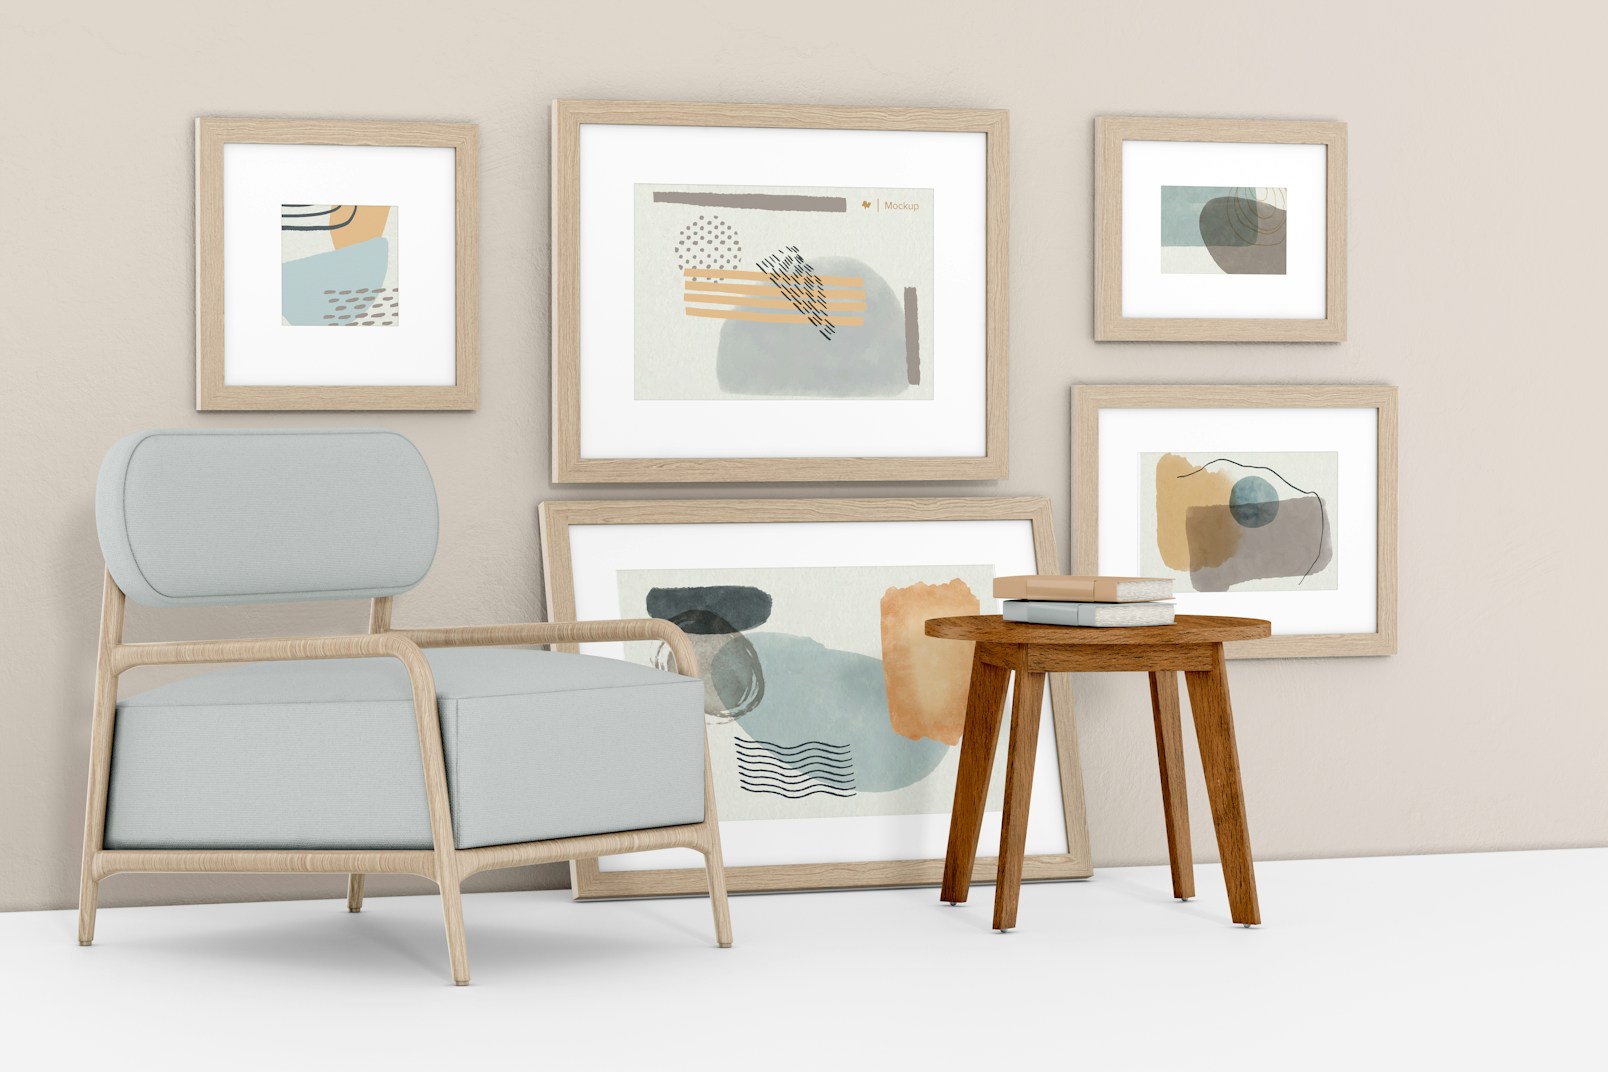 Gallery Frames with Armchair Mockup, Perspective